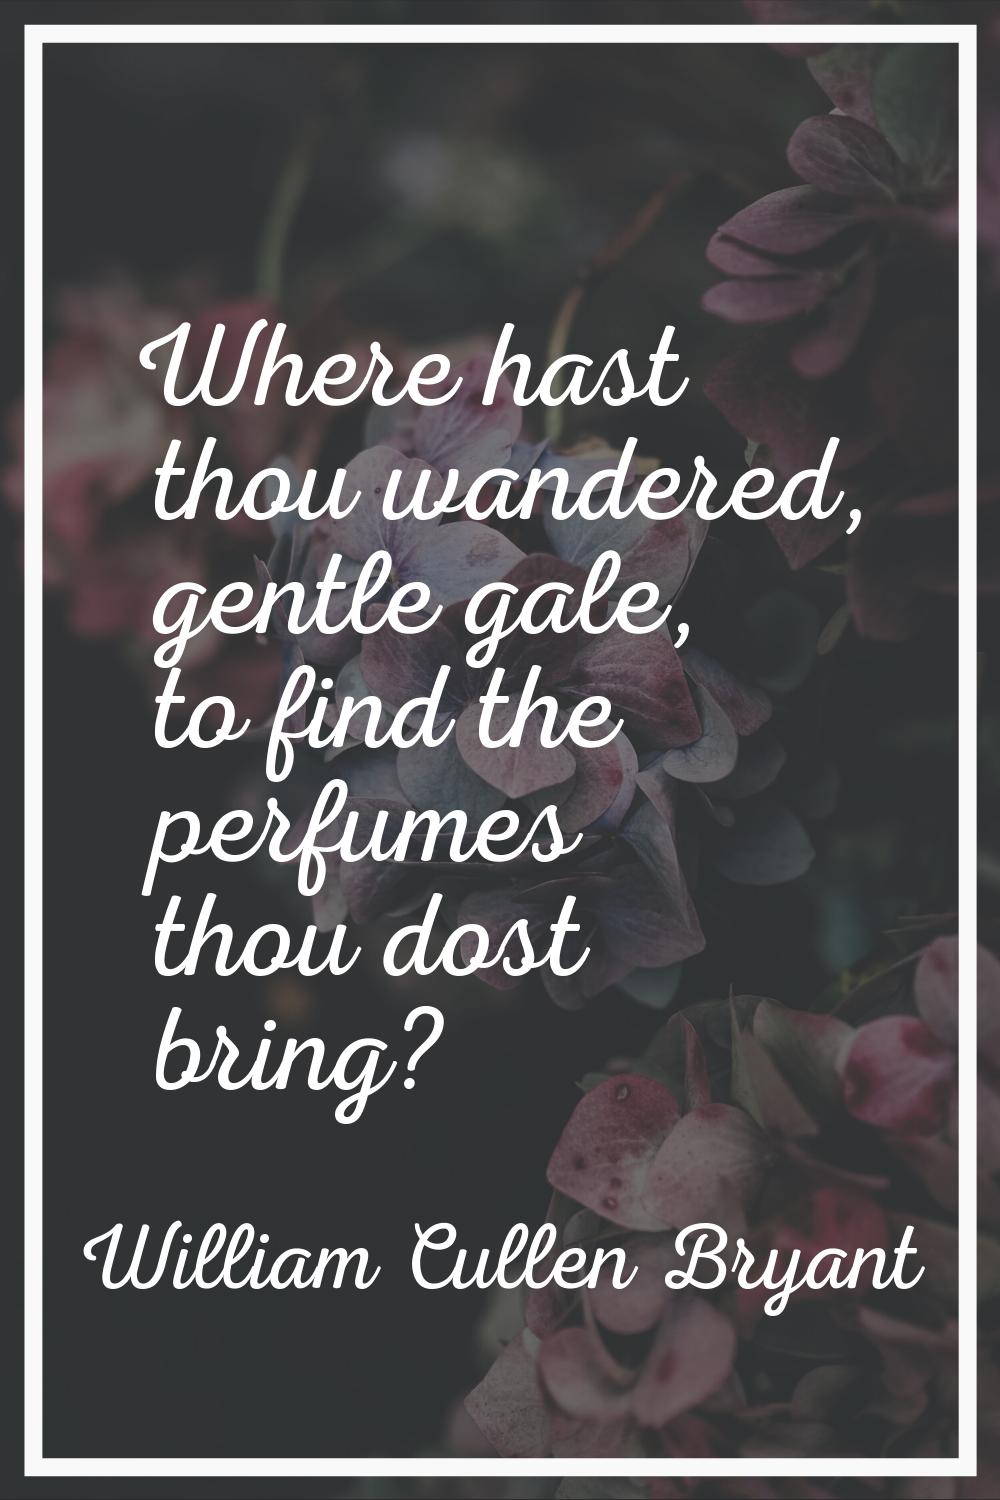 Where hast thou wandered, gentle gale, to find the perfumes thou dost bring?